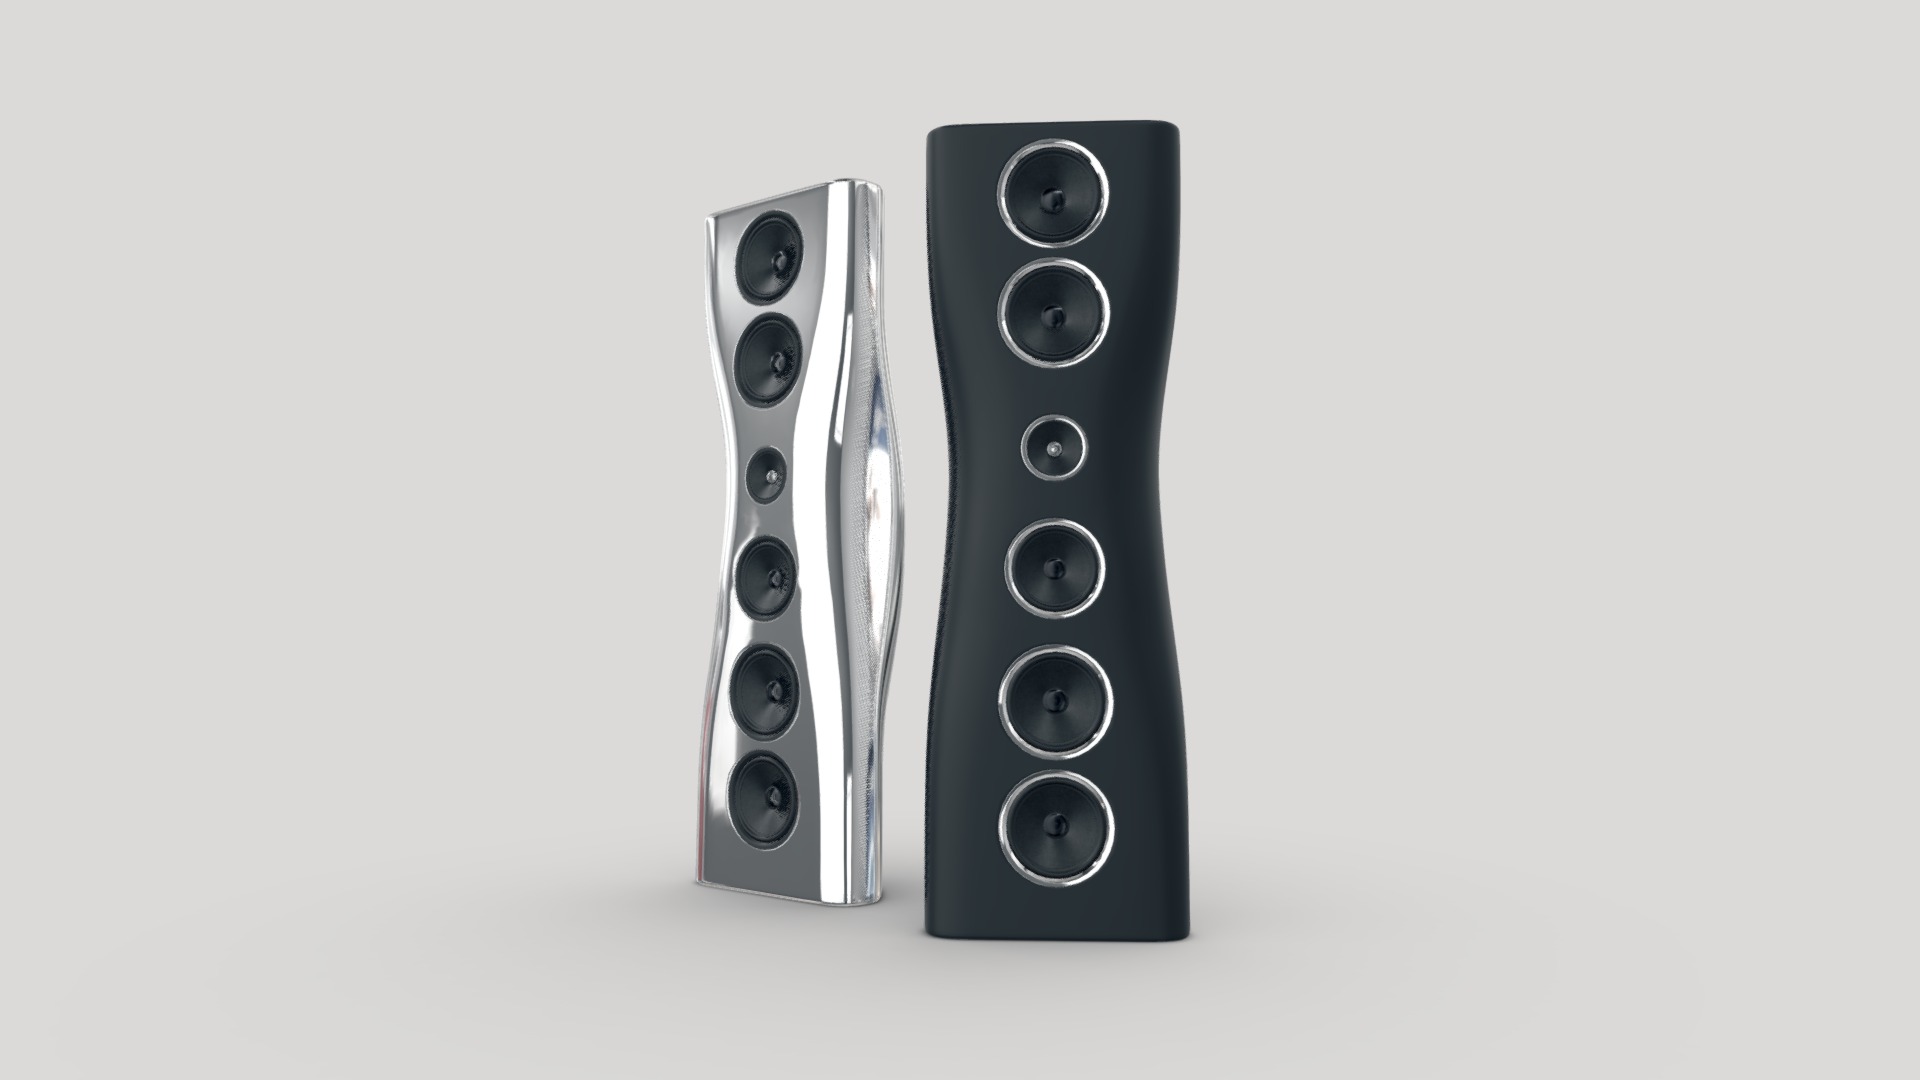 3D model KEF Muon speakers - This is a 3D model of the KEF Muon speakers. The 3D model is about a couple of black and white dominoes.